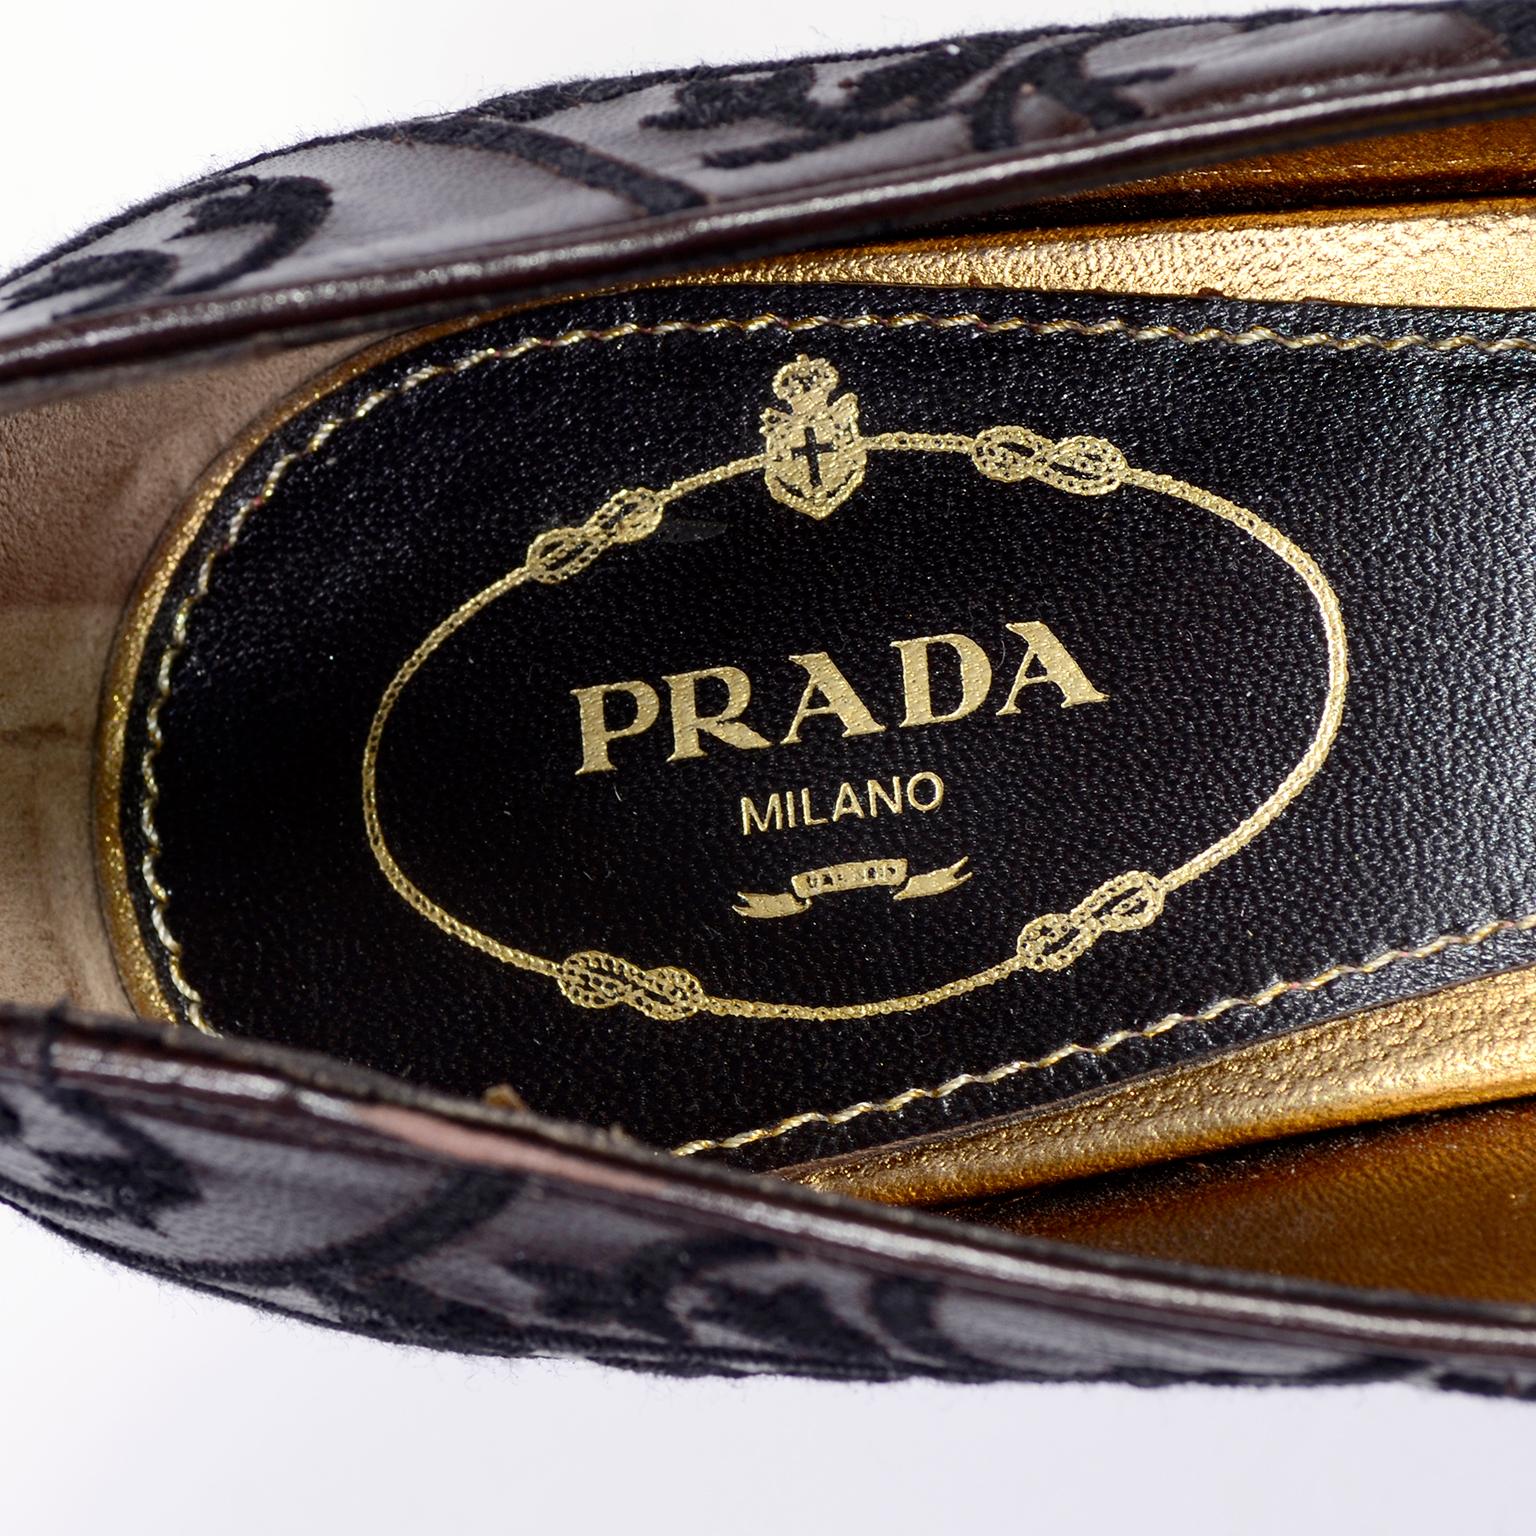 Prada Embroidered Shoes in Dark Brown Leather Size 37.5 W 3